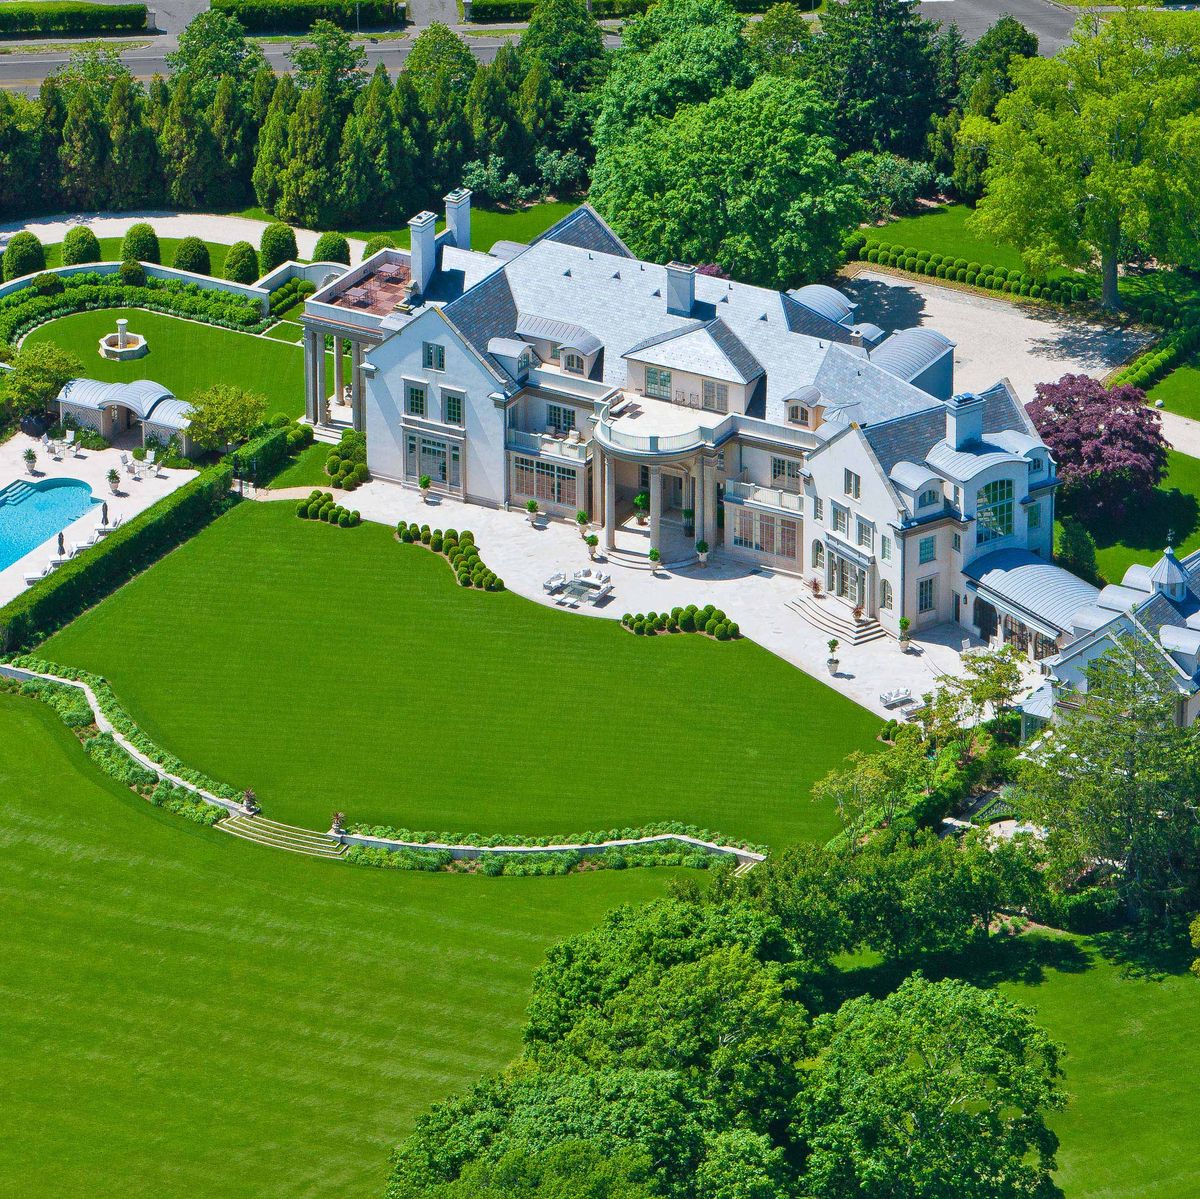 Late fashion designer Vince Camuto's Connecticut chateau is coming